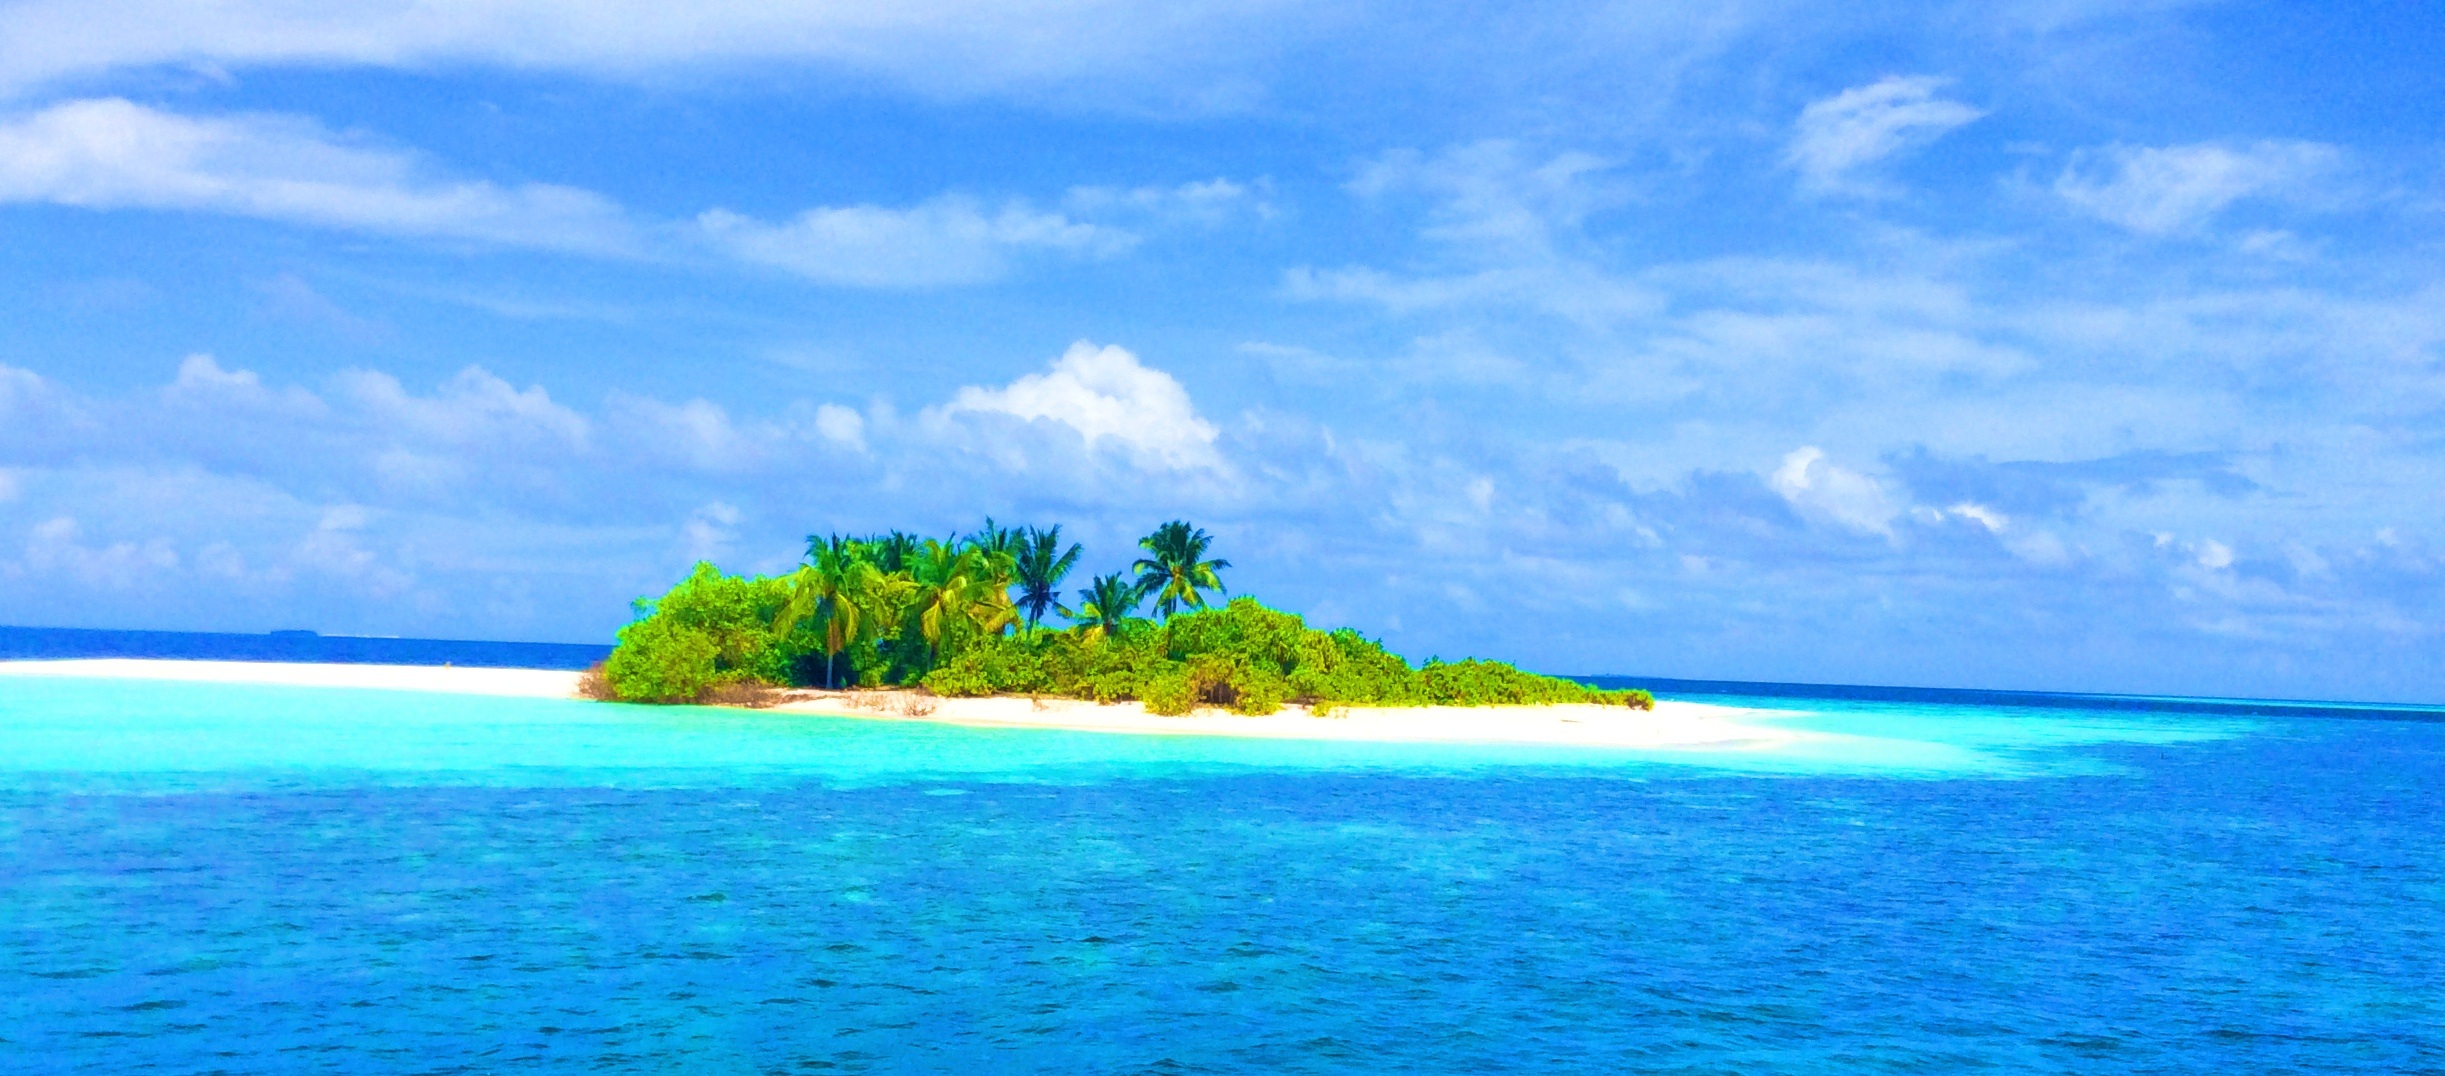 islet between body of water at daytime, maldives, beach, island